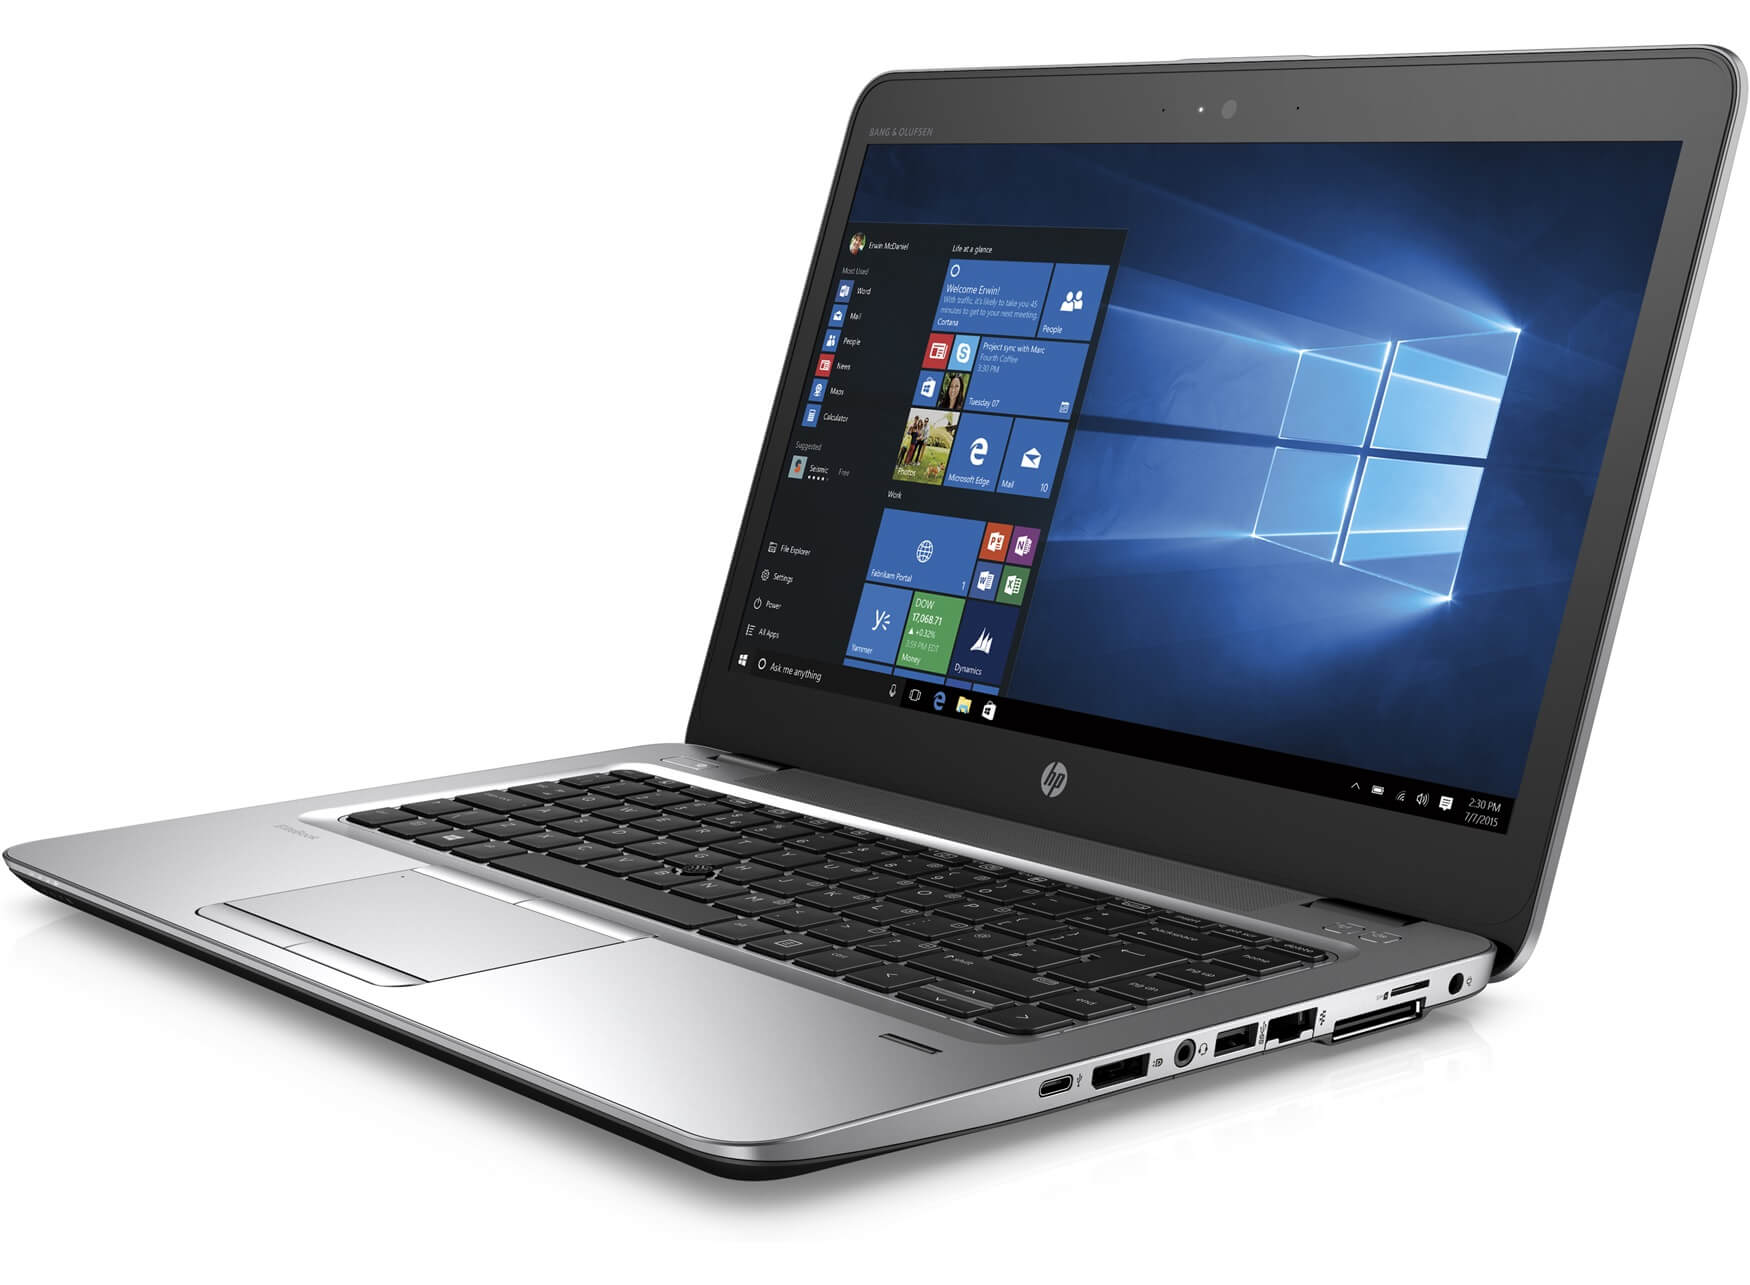 HP is silently installing resource hogging telemetry software